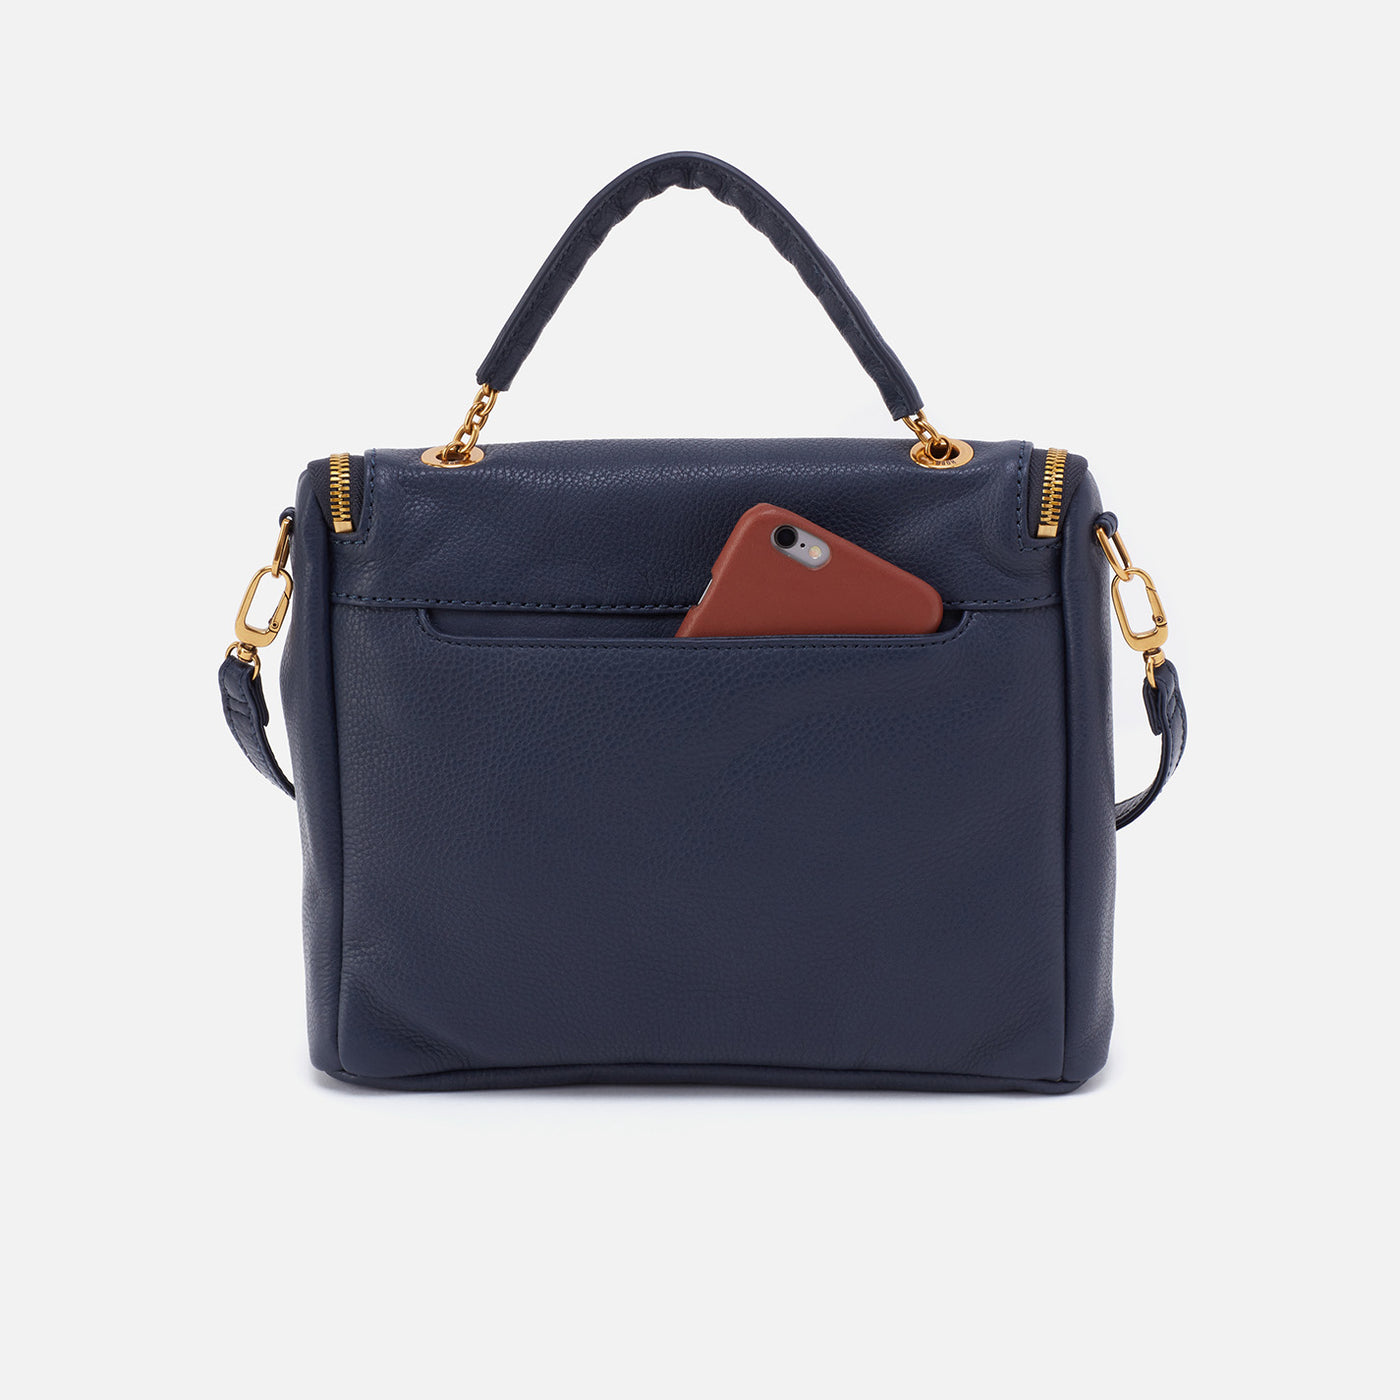 Fern Satchel In Pebbled Leather